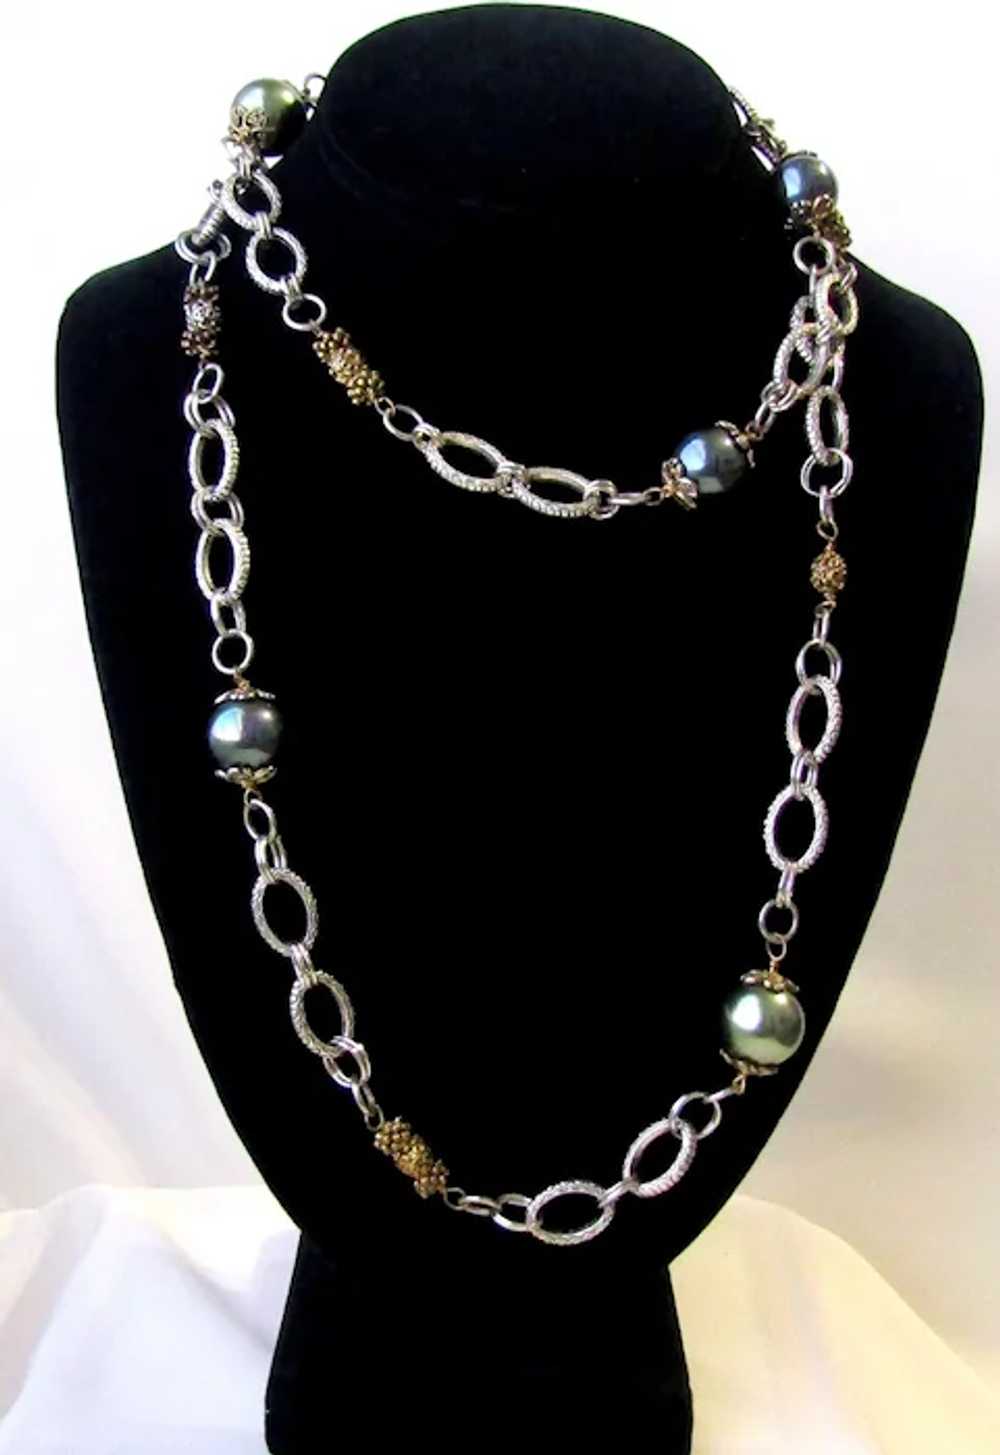 Vintage Faux Gray Pearls Chain Necklace - image 3